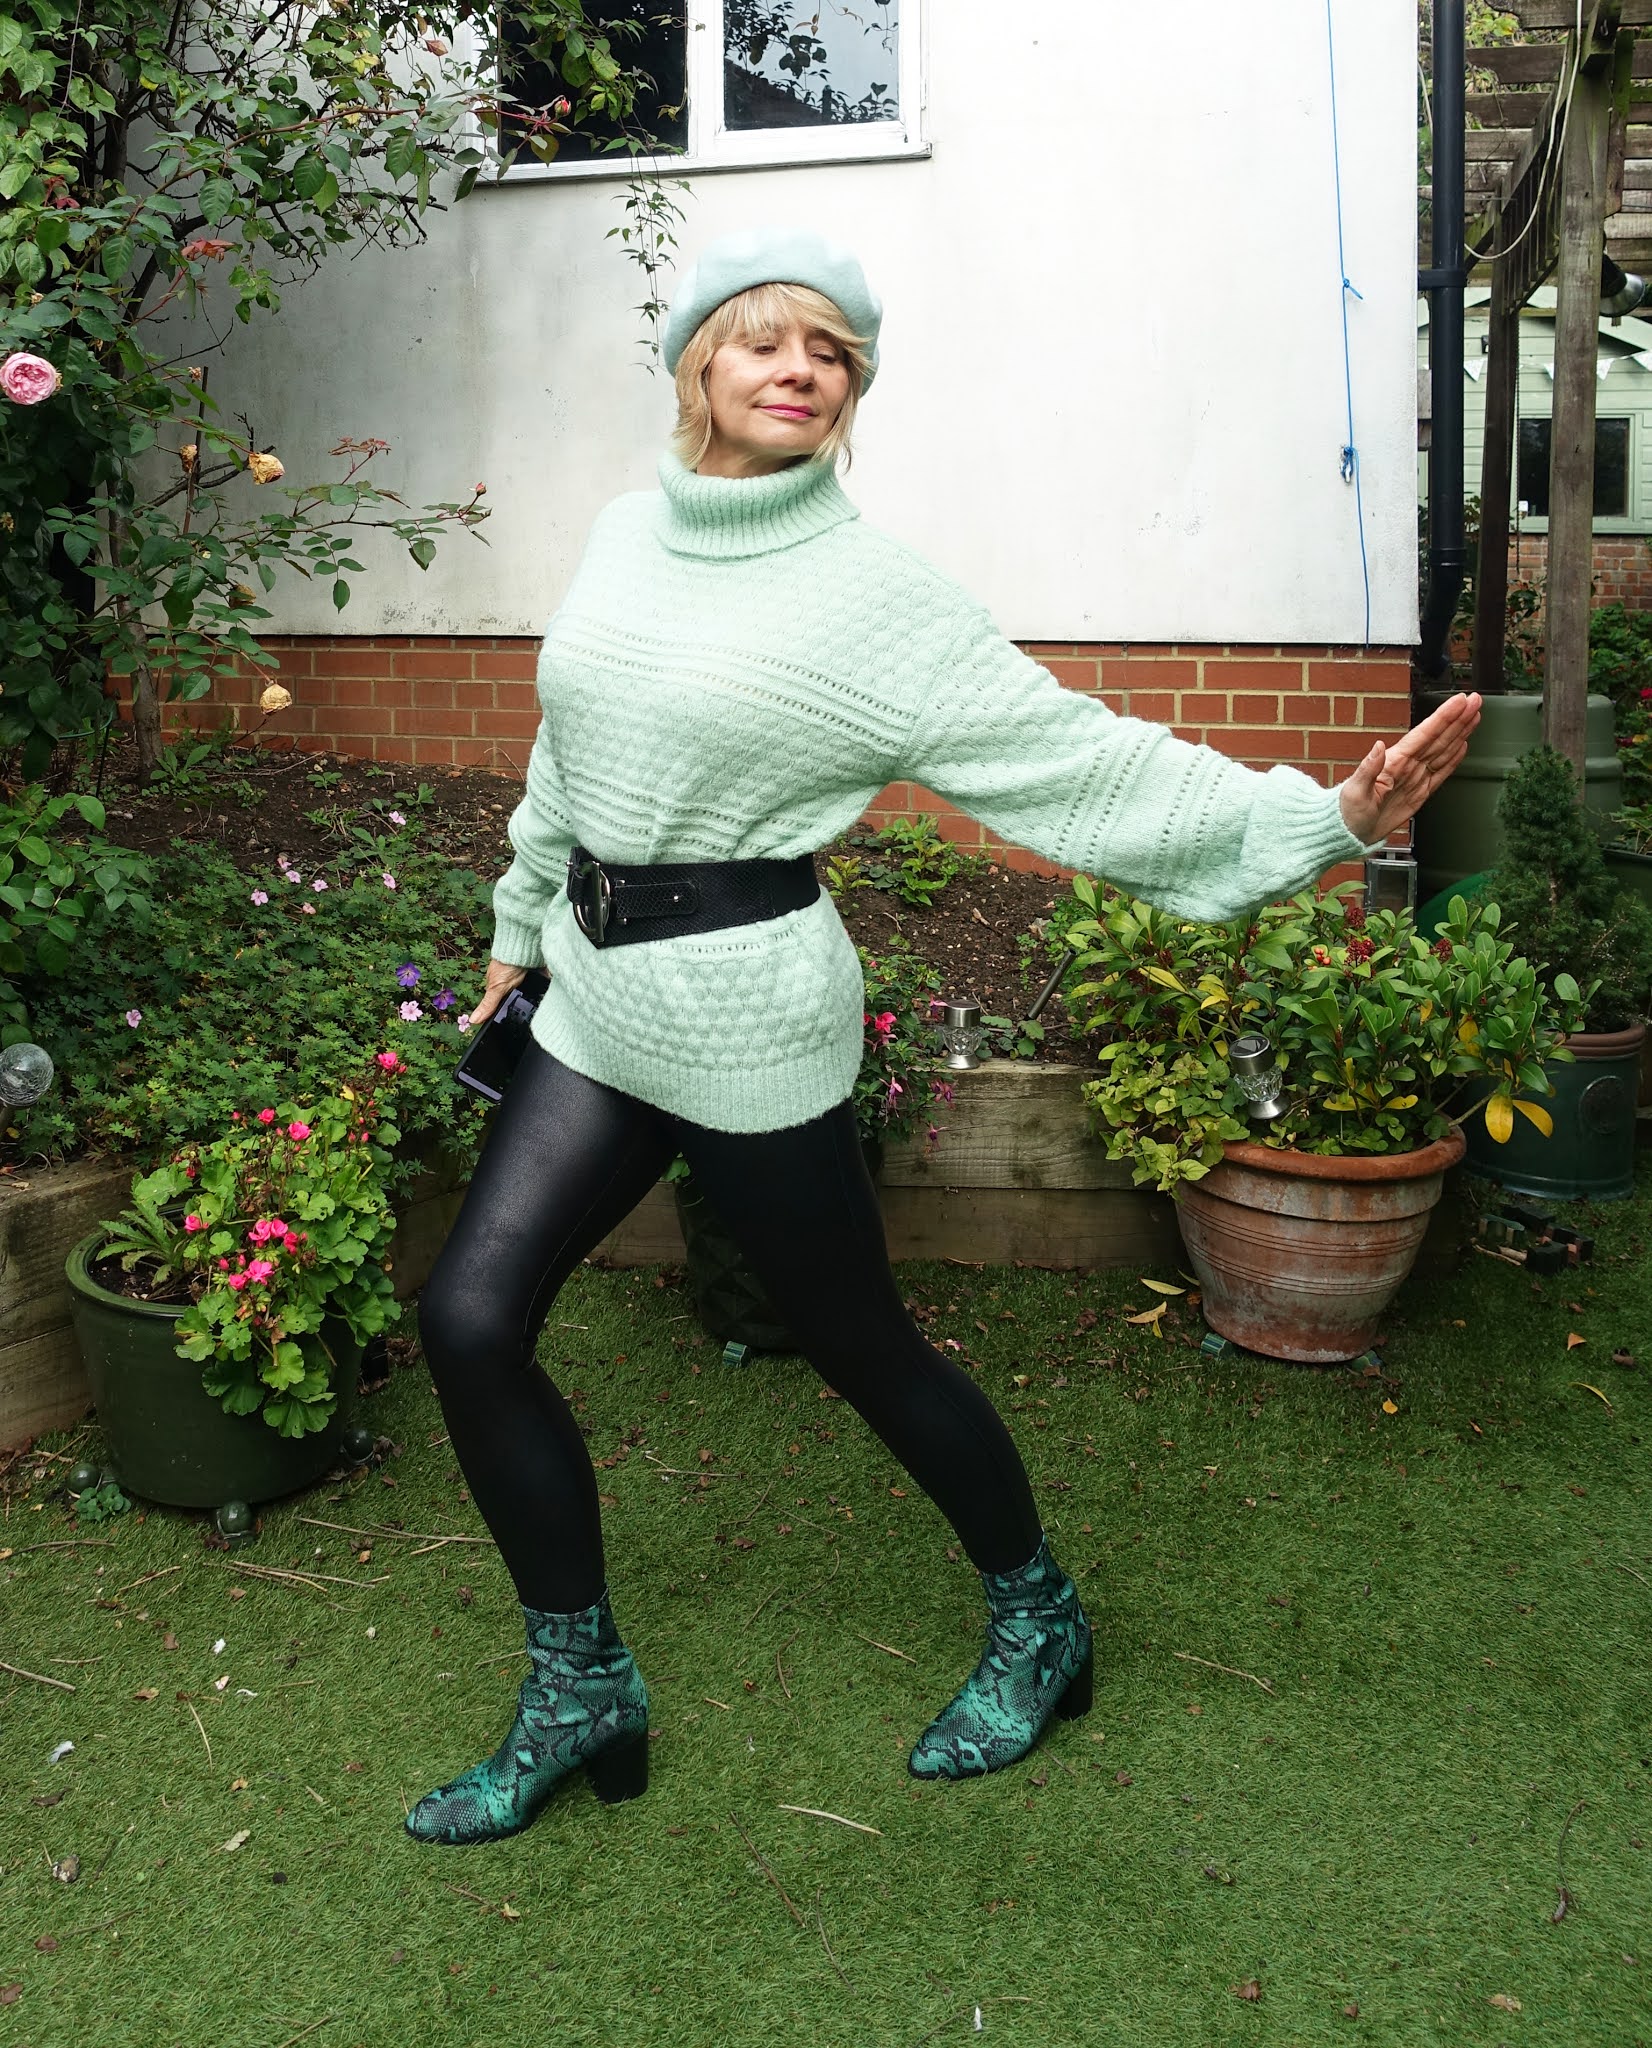 How to style faux leather leggings over 50: Is This Mutton chooses a textured, long mint green jumper, waist cincher belt and mint green beret with snakeskin ankle boots